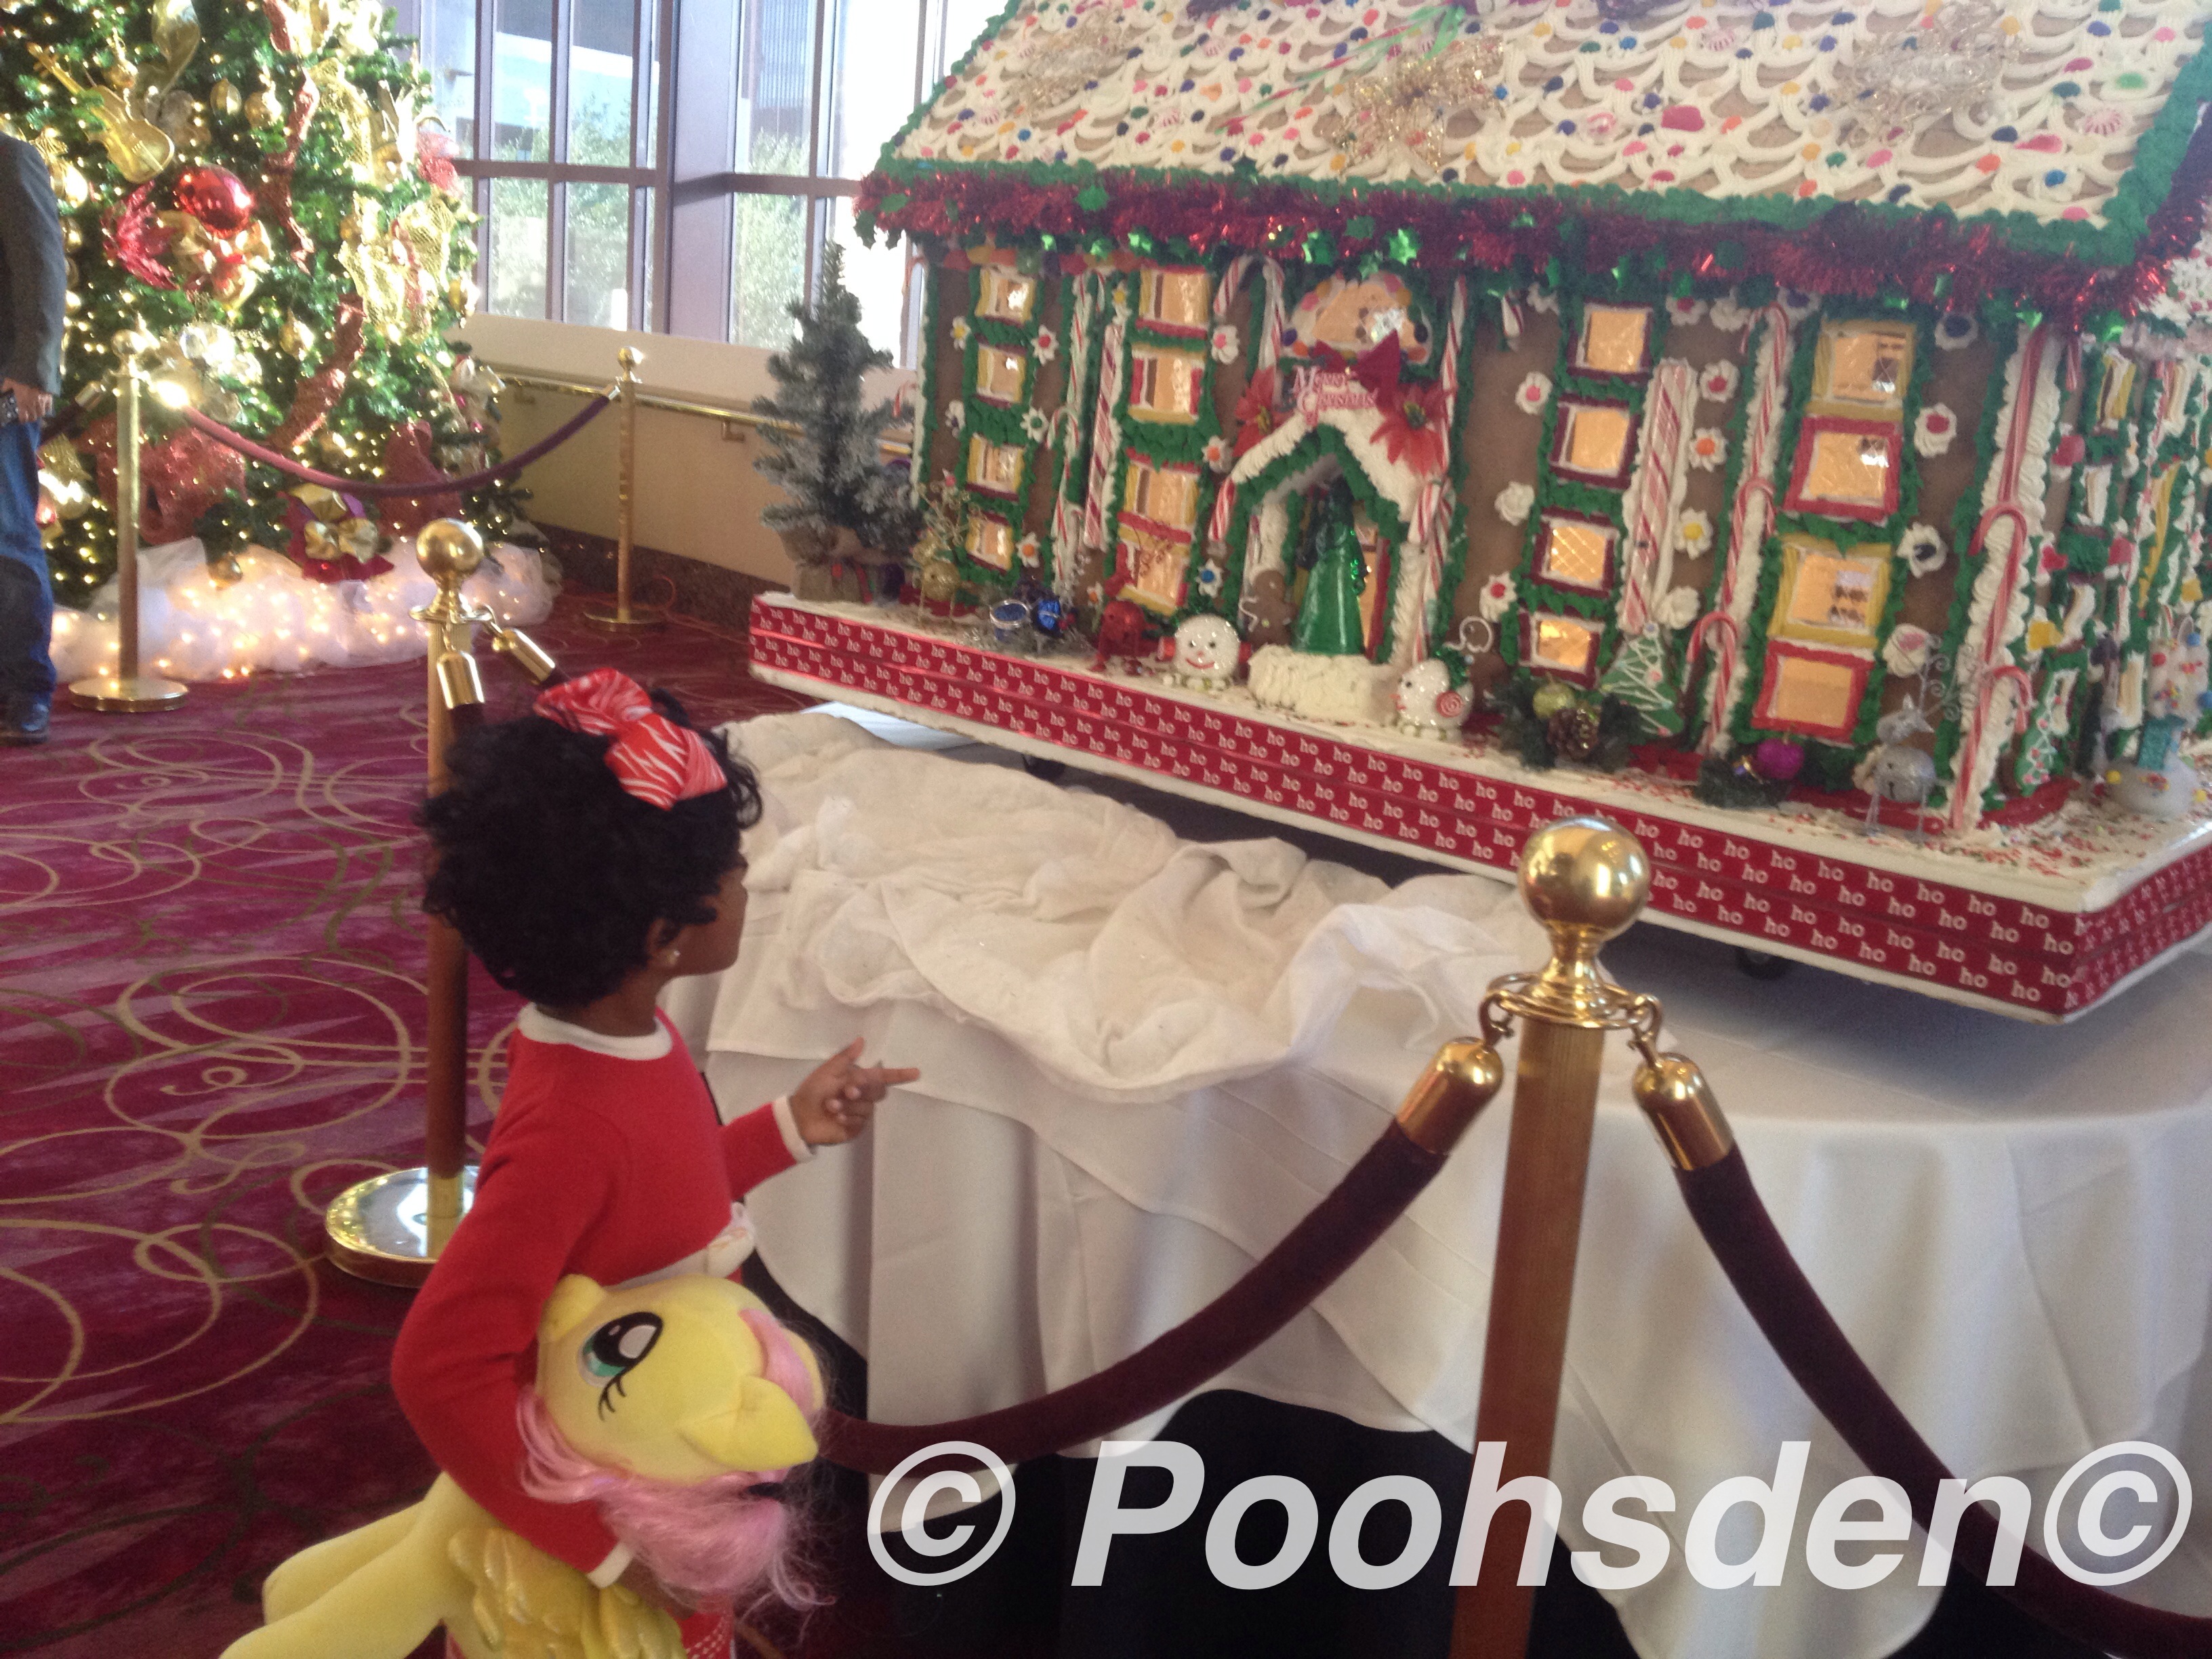 Watching the huge gingerbread house at Houston Wortham Center